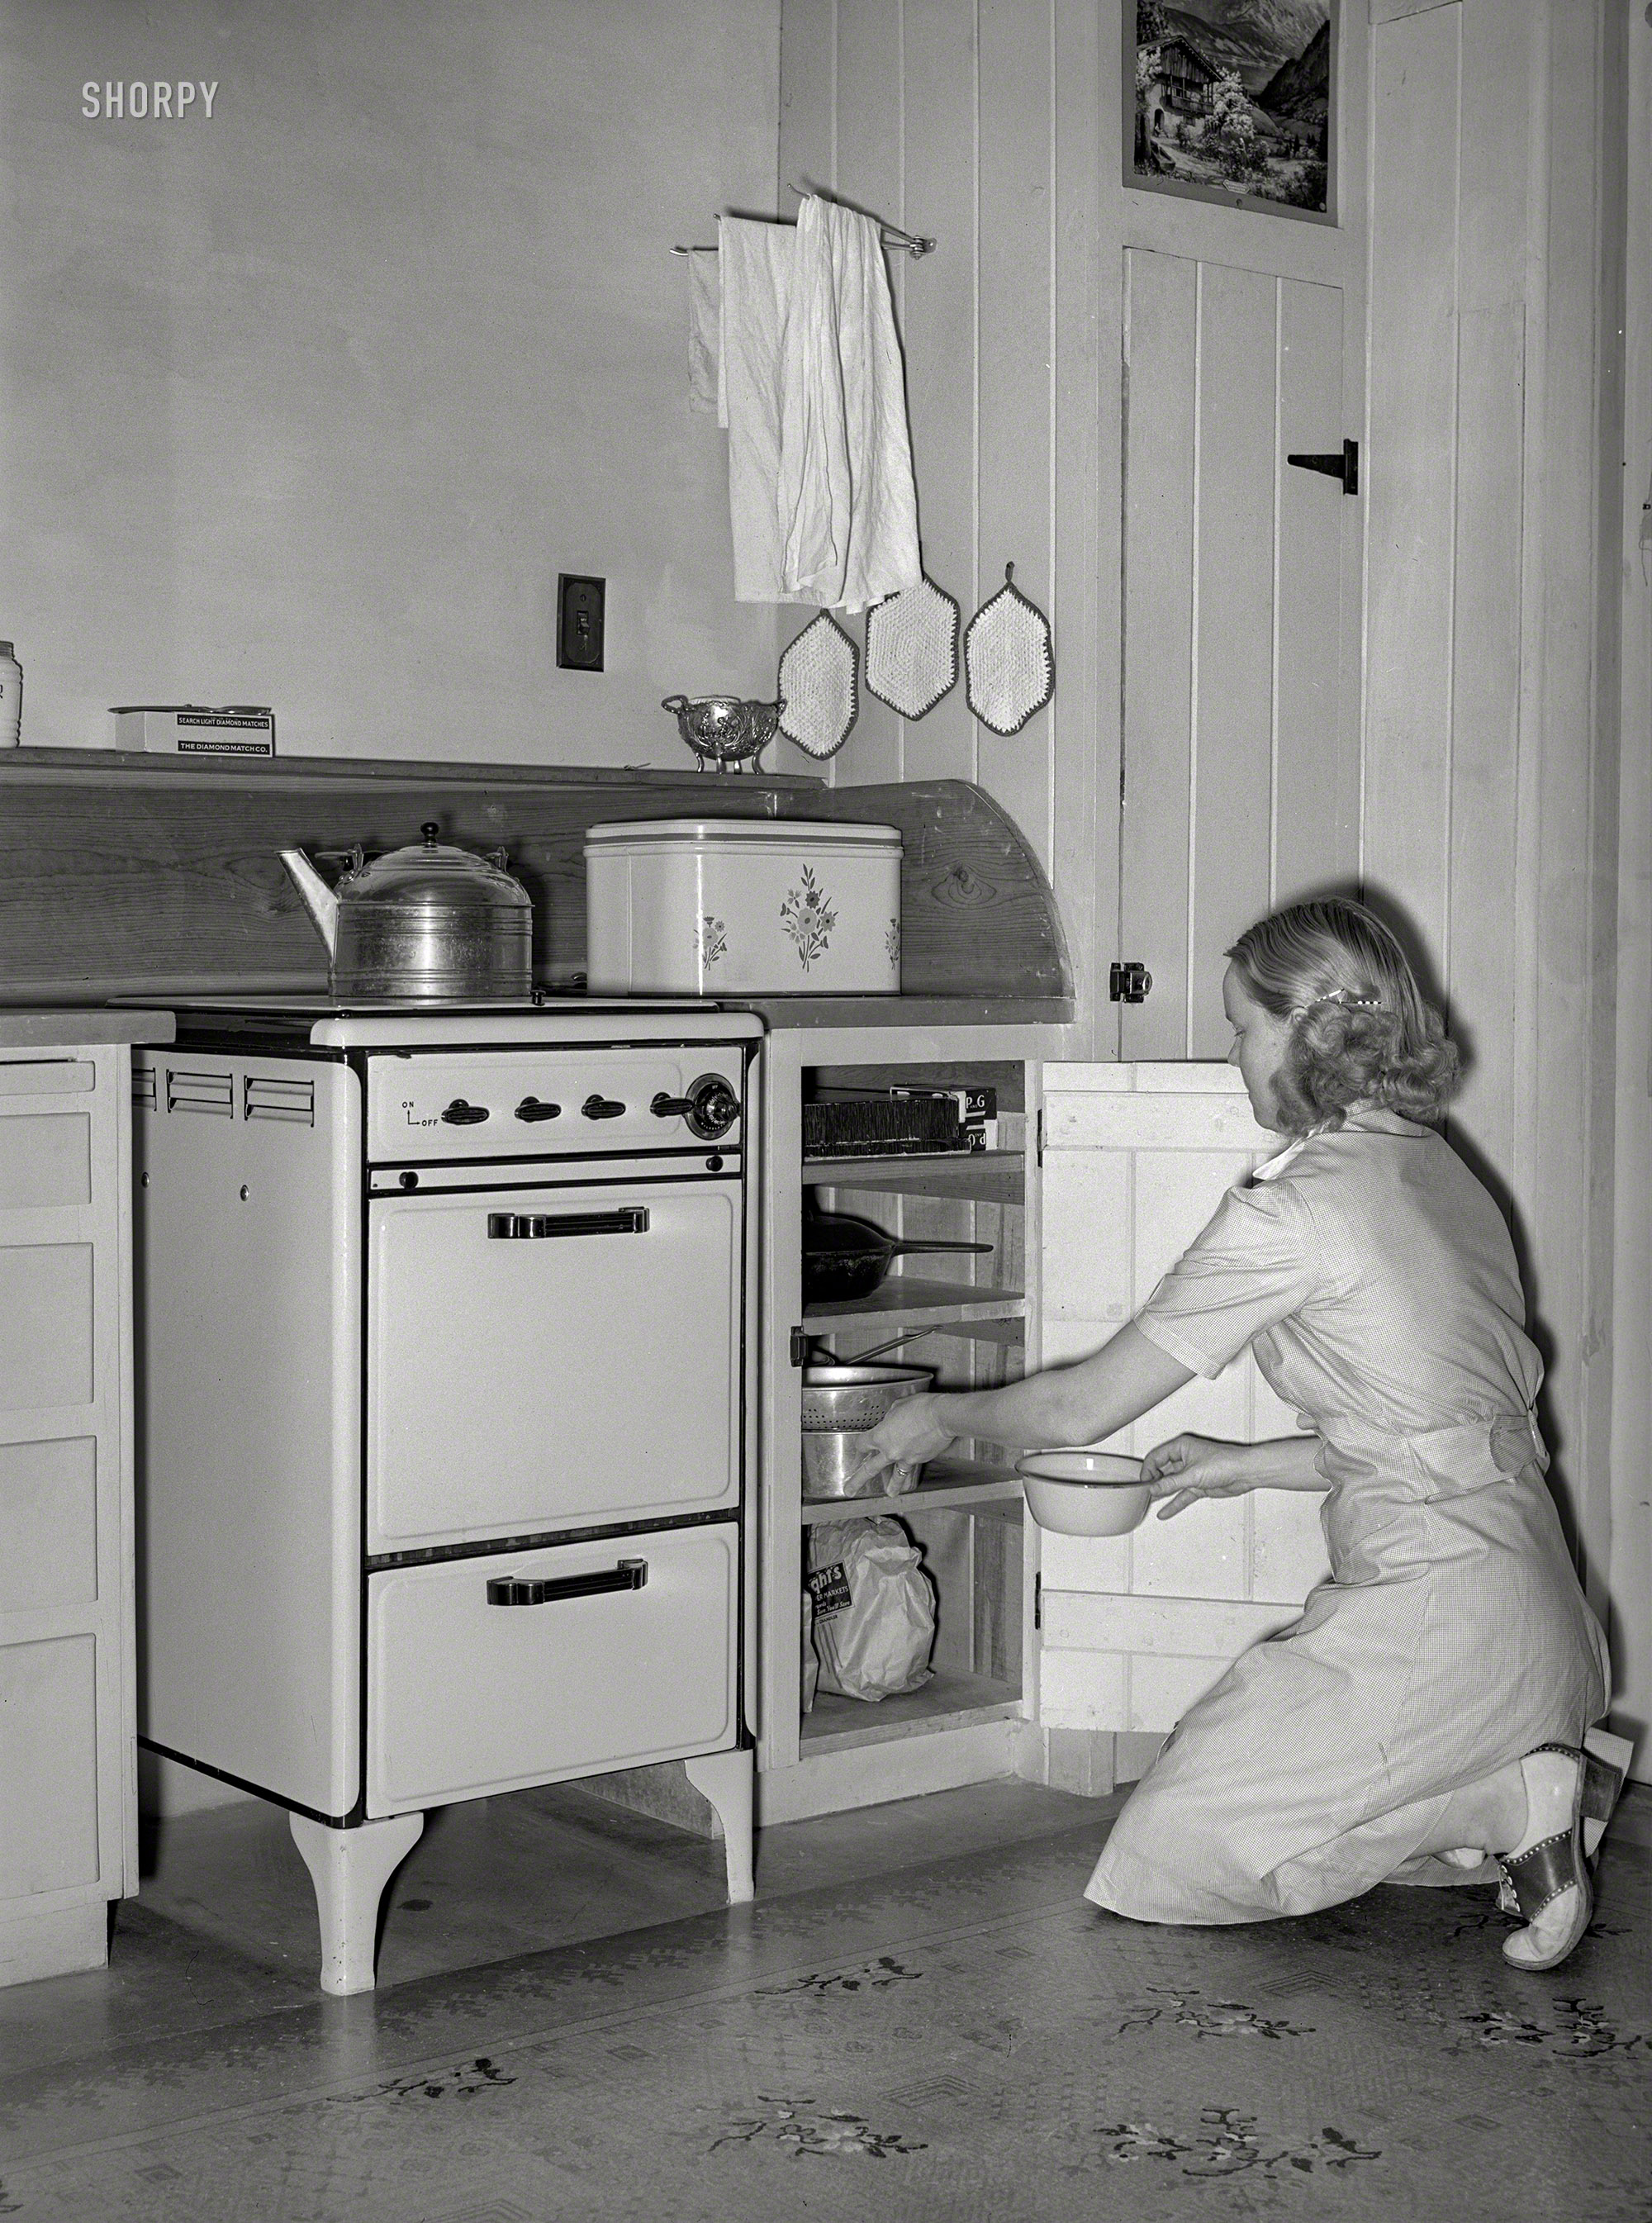 May 1940. "Wife of member of the Arizona part-time farms, Chandler Unit, Maricopa County, at her kitchen stove." Photo by Russell Lee. View full size.